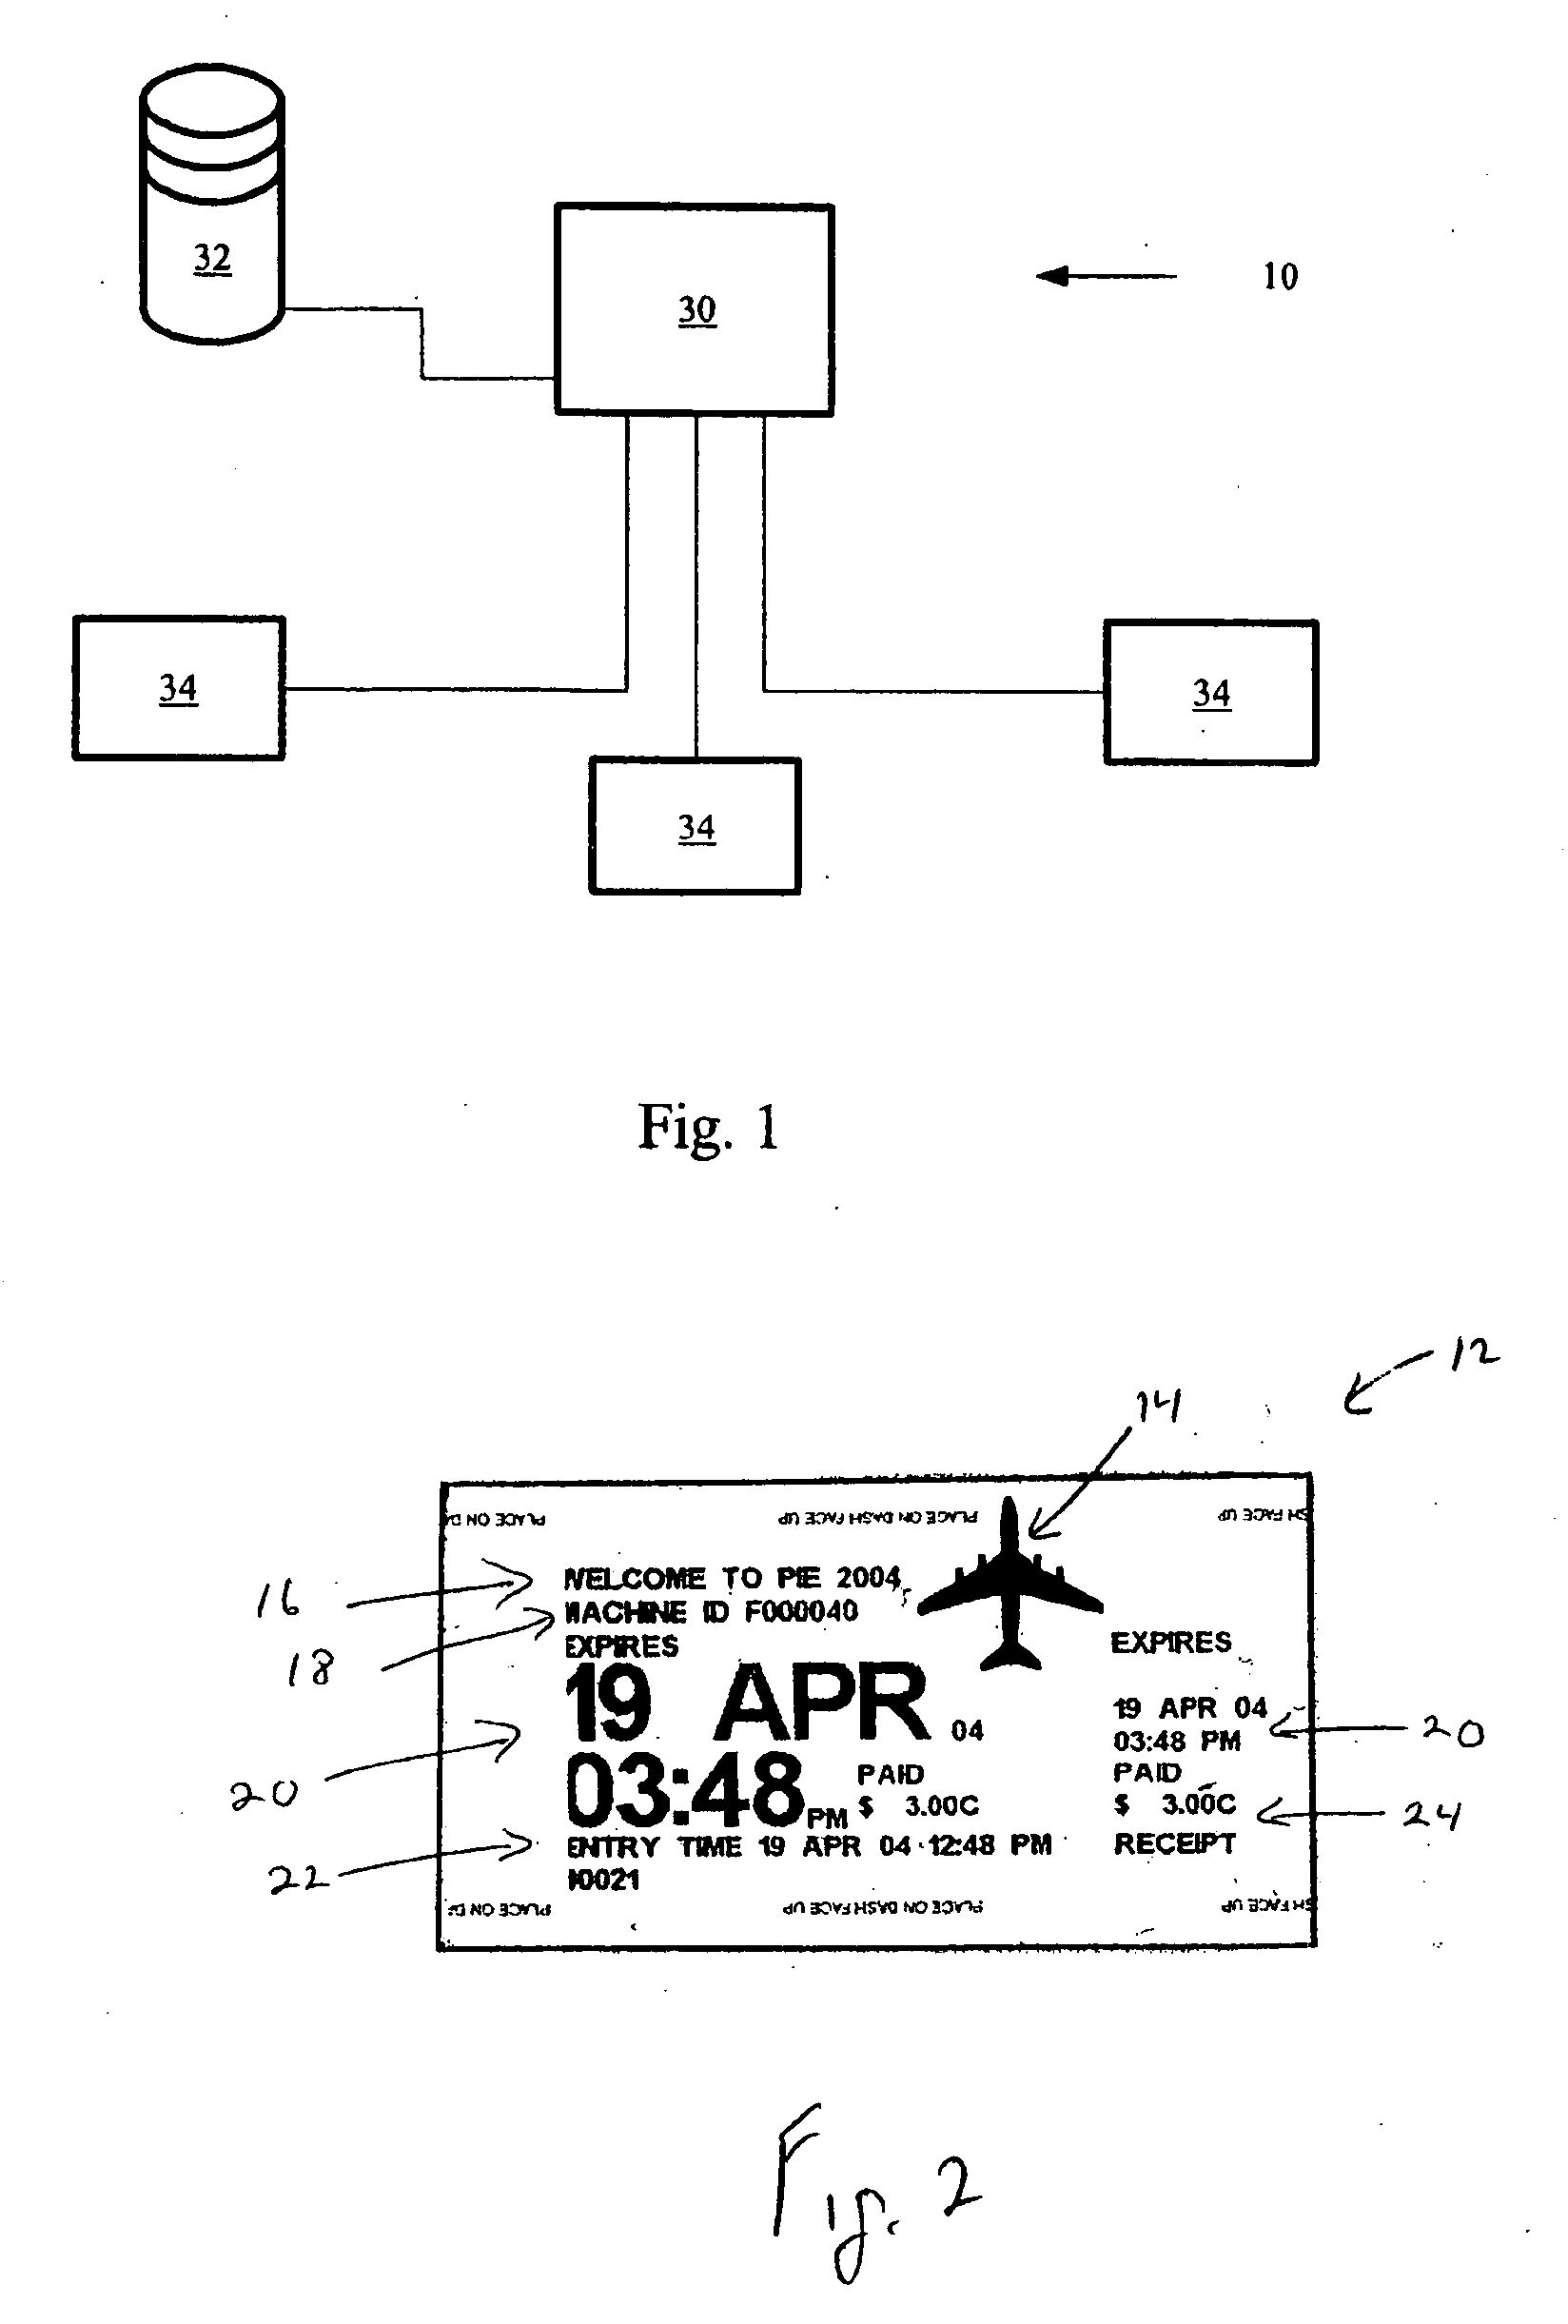 Method and system for providing a document which can be visually authenticated